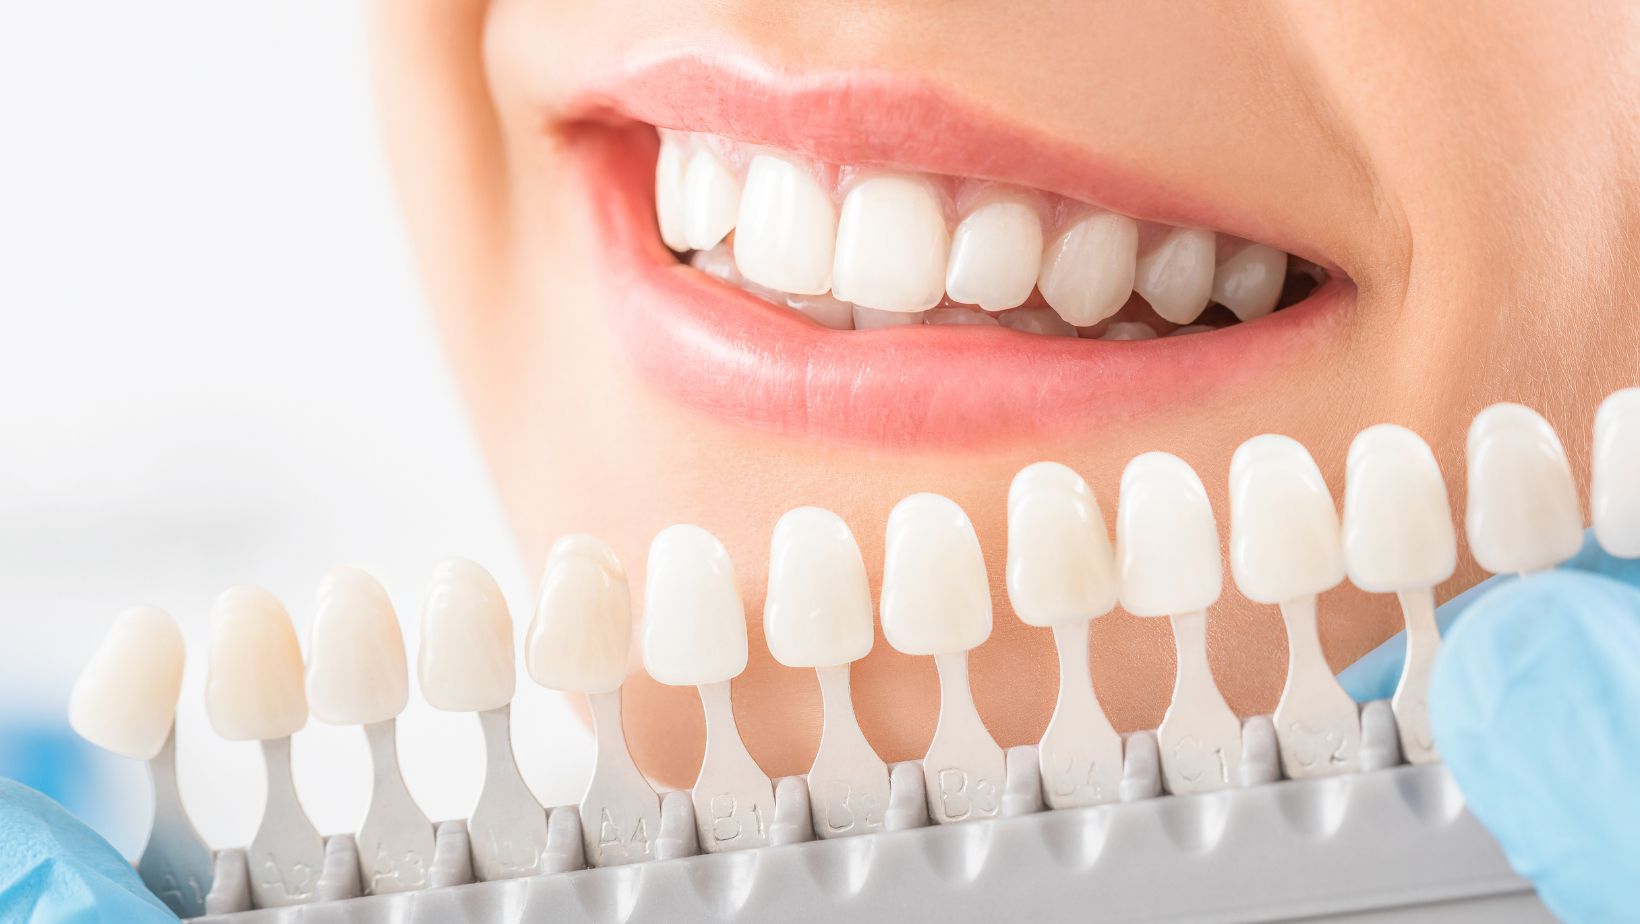 Top 5 Benefits Of Collaborating With Private Label Teeth Whitening Manufacturers